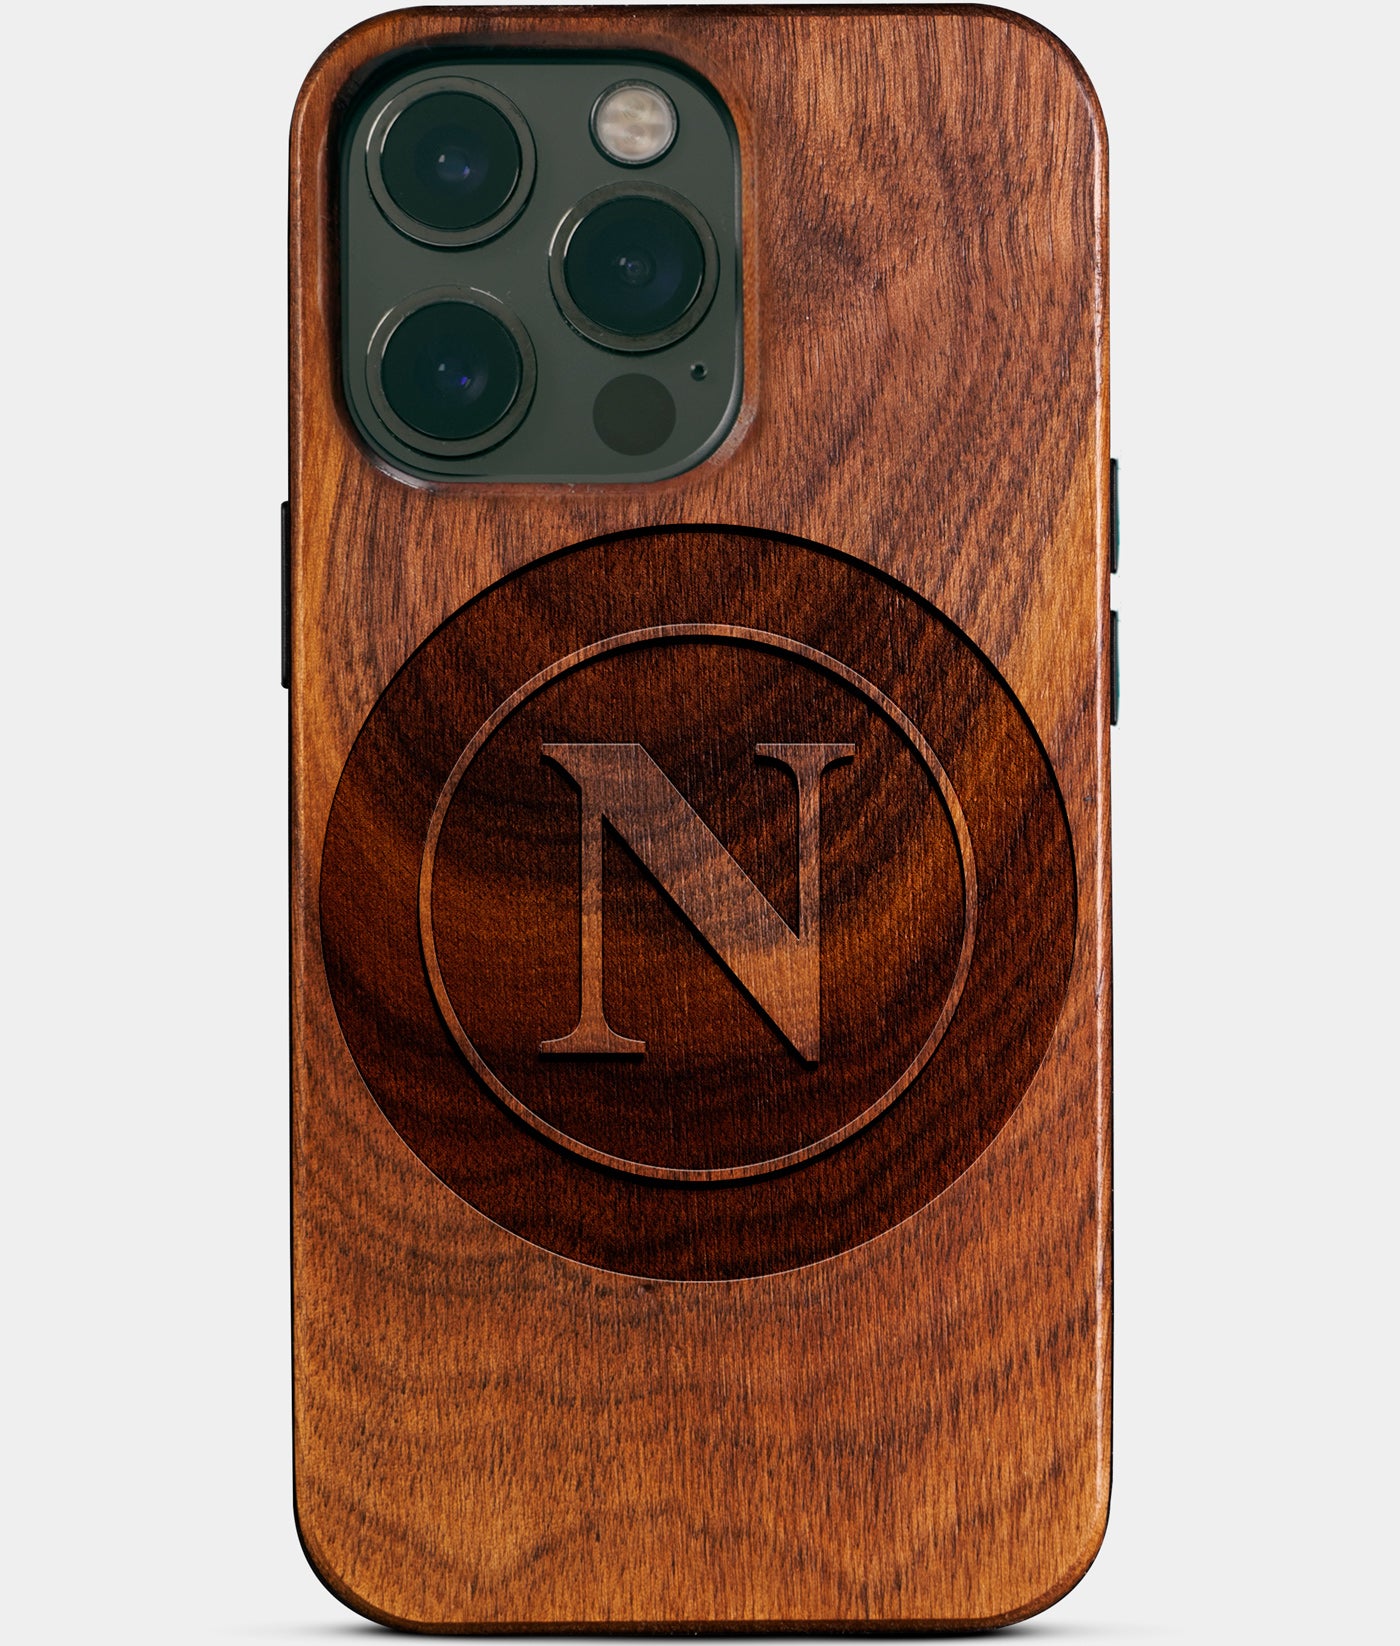 Custom SSC Napoli iPhone 14/14 Pro/14 Pro Max/14 Plus Case - Carved Wood SSC Napoli Cover - SSC Napoli Birthday Christmas Gifts - iPhone 14 Case - Custom SSC Napoli Gift For Him - SSC Napoli Gifts For Men - 2022 SSC Napoli Christmas Gifts - Carved Wood Custom Naples Italian Football Gift For Him - Monogrammed unusual Italy football gifts iPhone 14 | iPhone 14 Pro | 14 Plus Covers | iPhone 13 | iPhone 13 Pro | iPhone 13 Pro Max | iPhone 12 Pro Max | iPhone 12 By by Engraved In Nature